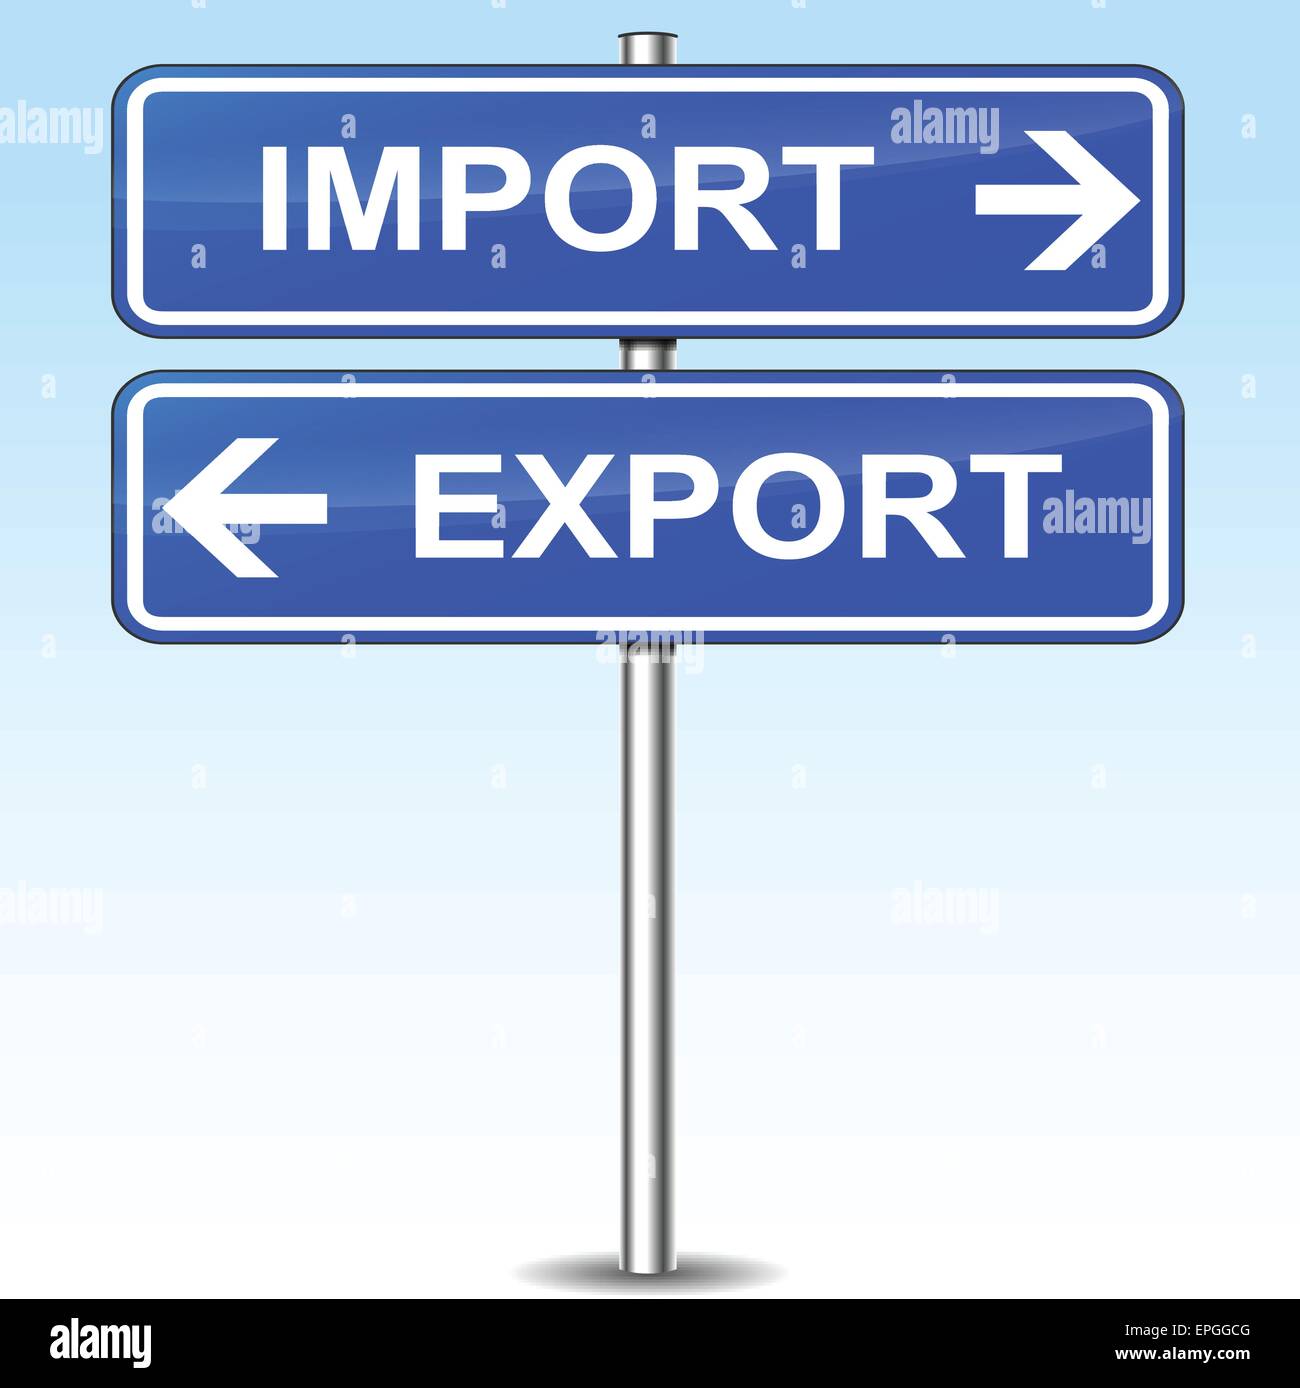 illustration of import and export directional blue signs Stock Vector